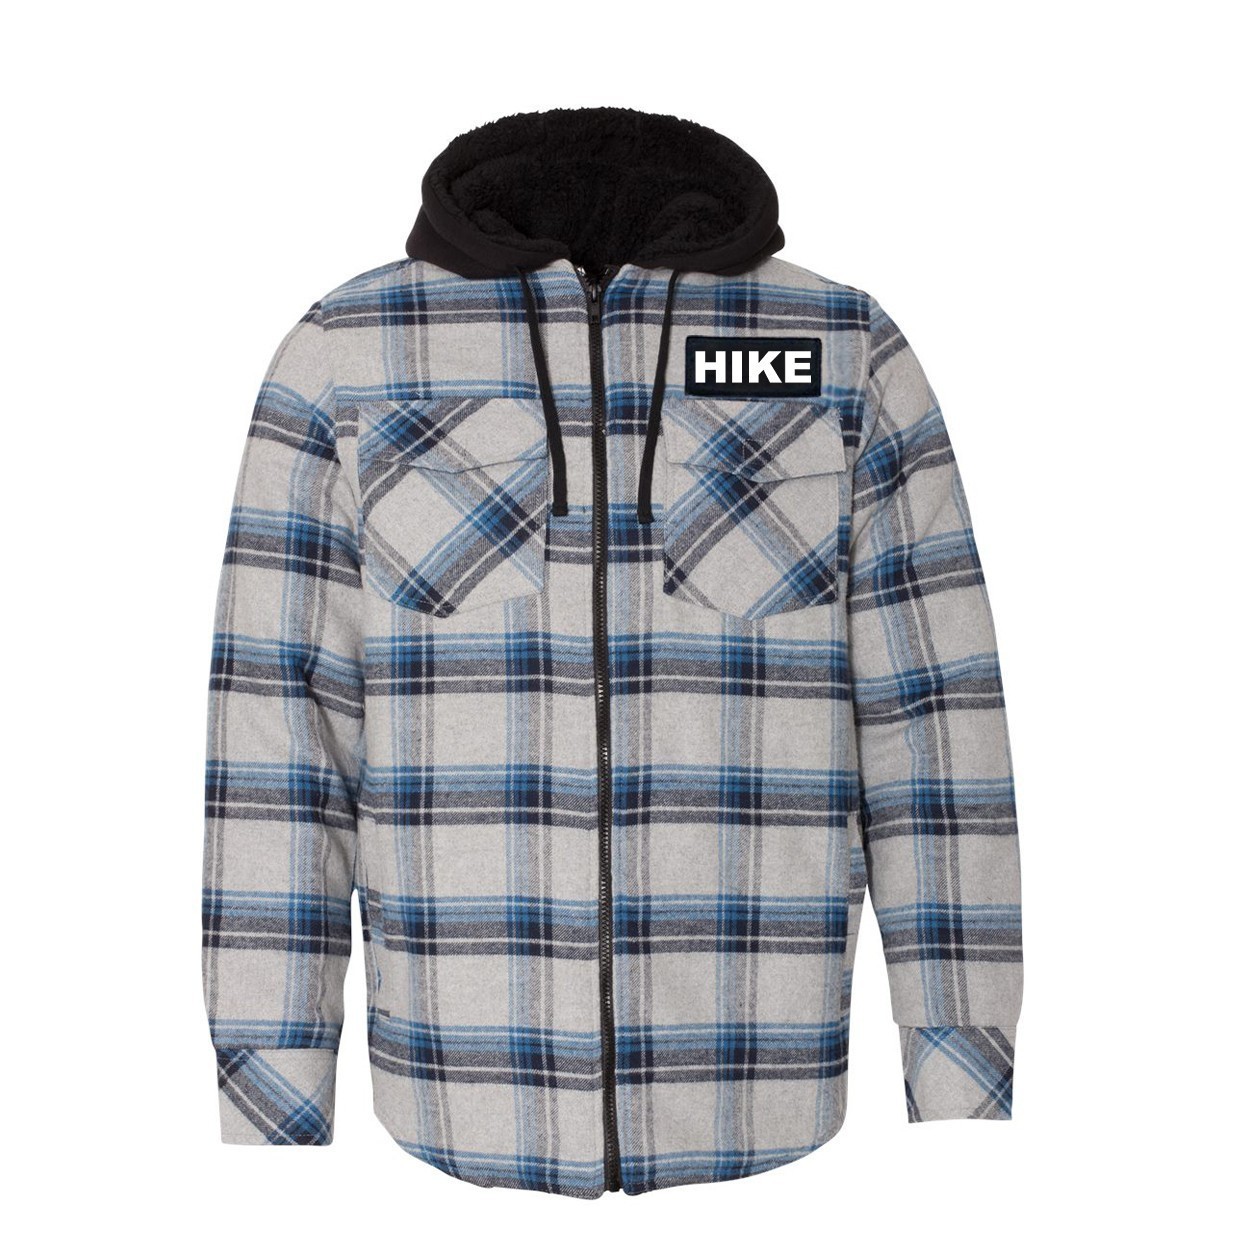 Hike Brand Logo Classic Unisex Full Zip Woven Patch Hooded Flannel Jacket Gray/ Blue